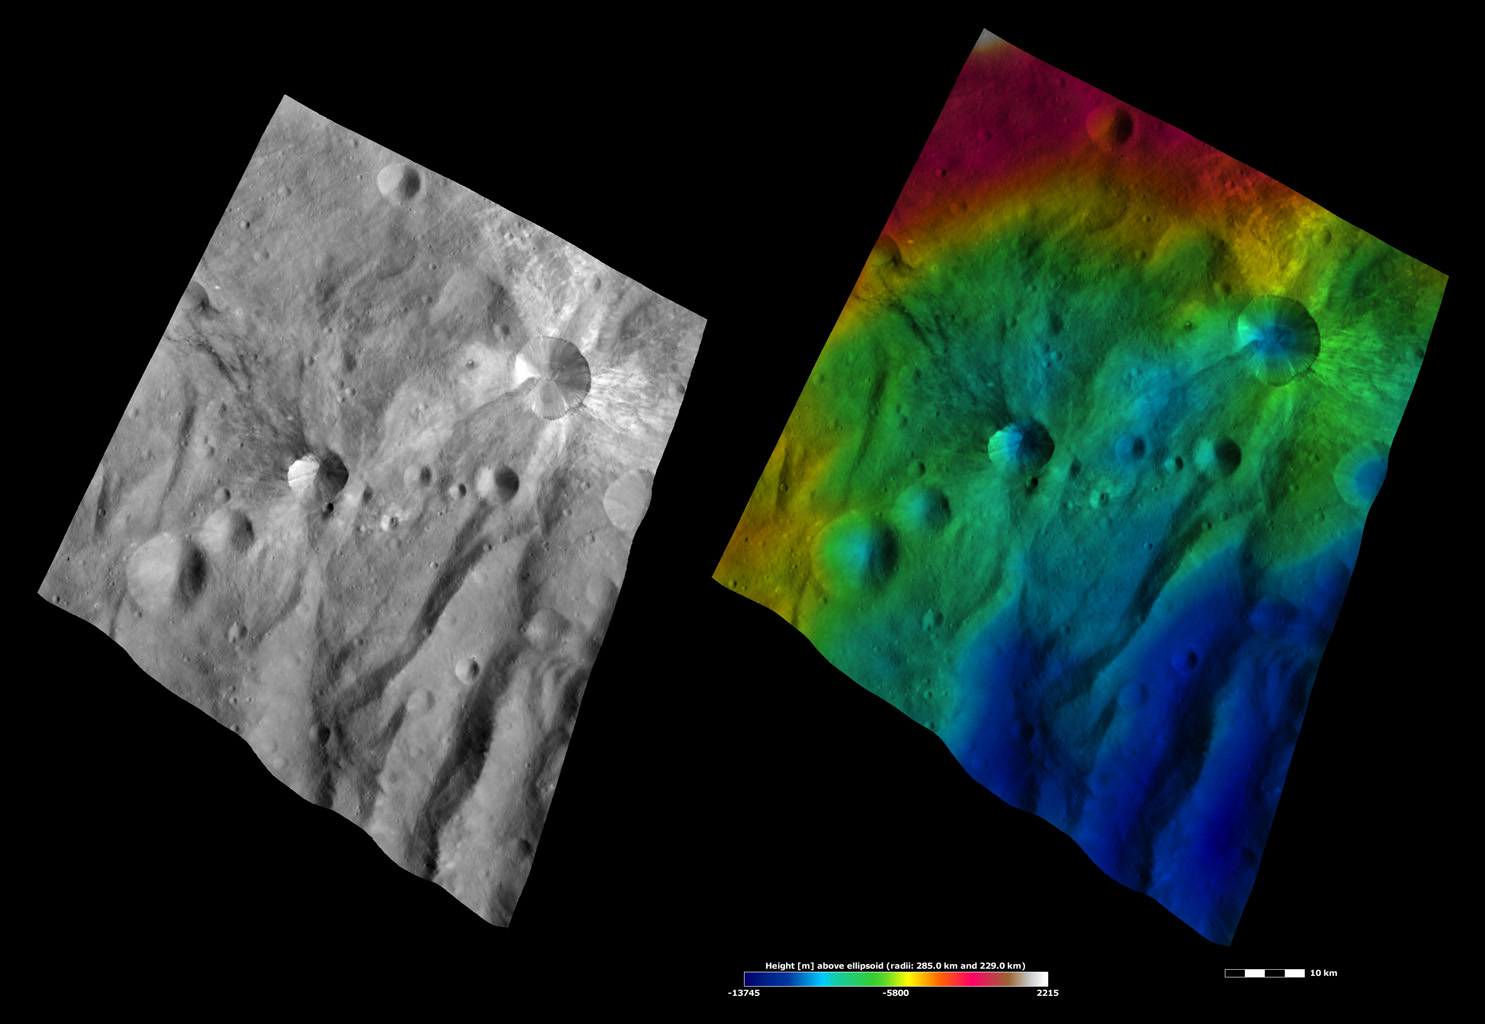 Apparent Brightness and Topography Images of Canuleia and Sossia Craters